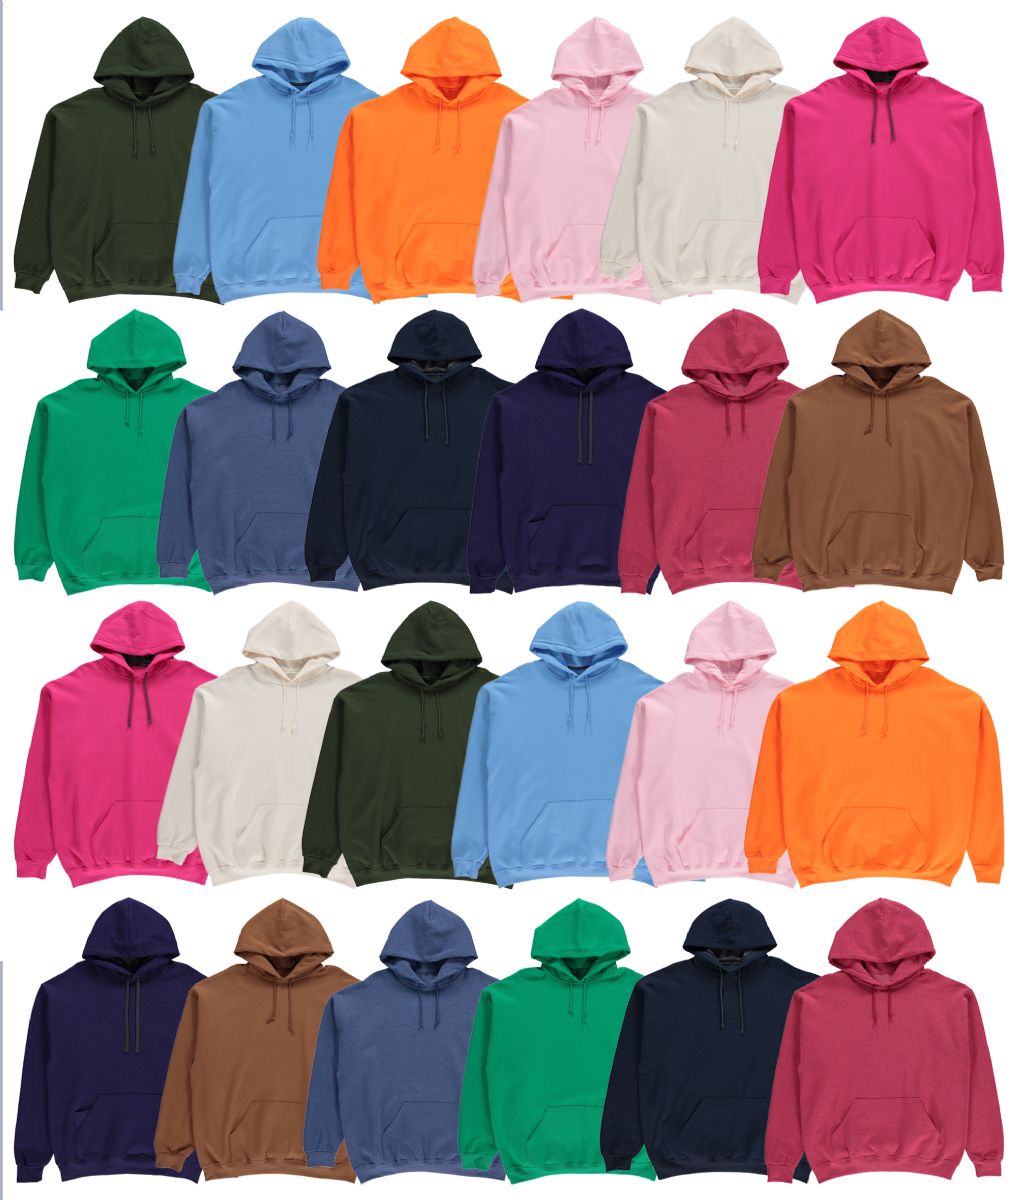 Mill Graded Gildan Irregular Adults Long Sleeve T-Shirts Assorted Colors  And Sizes - at -  